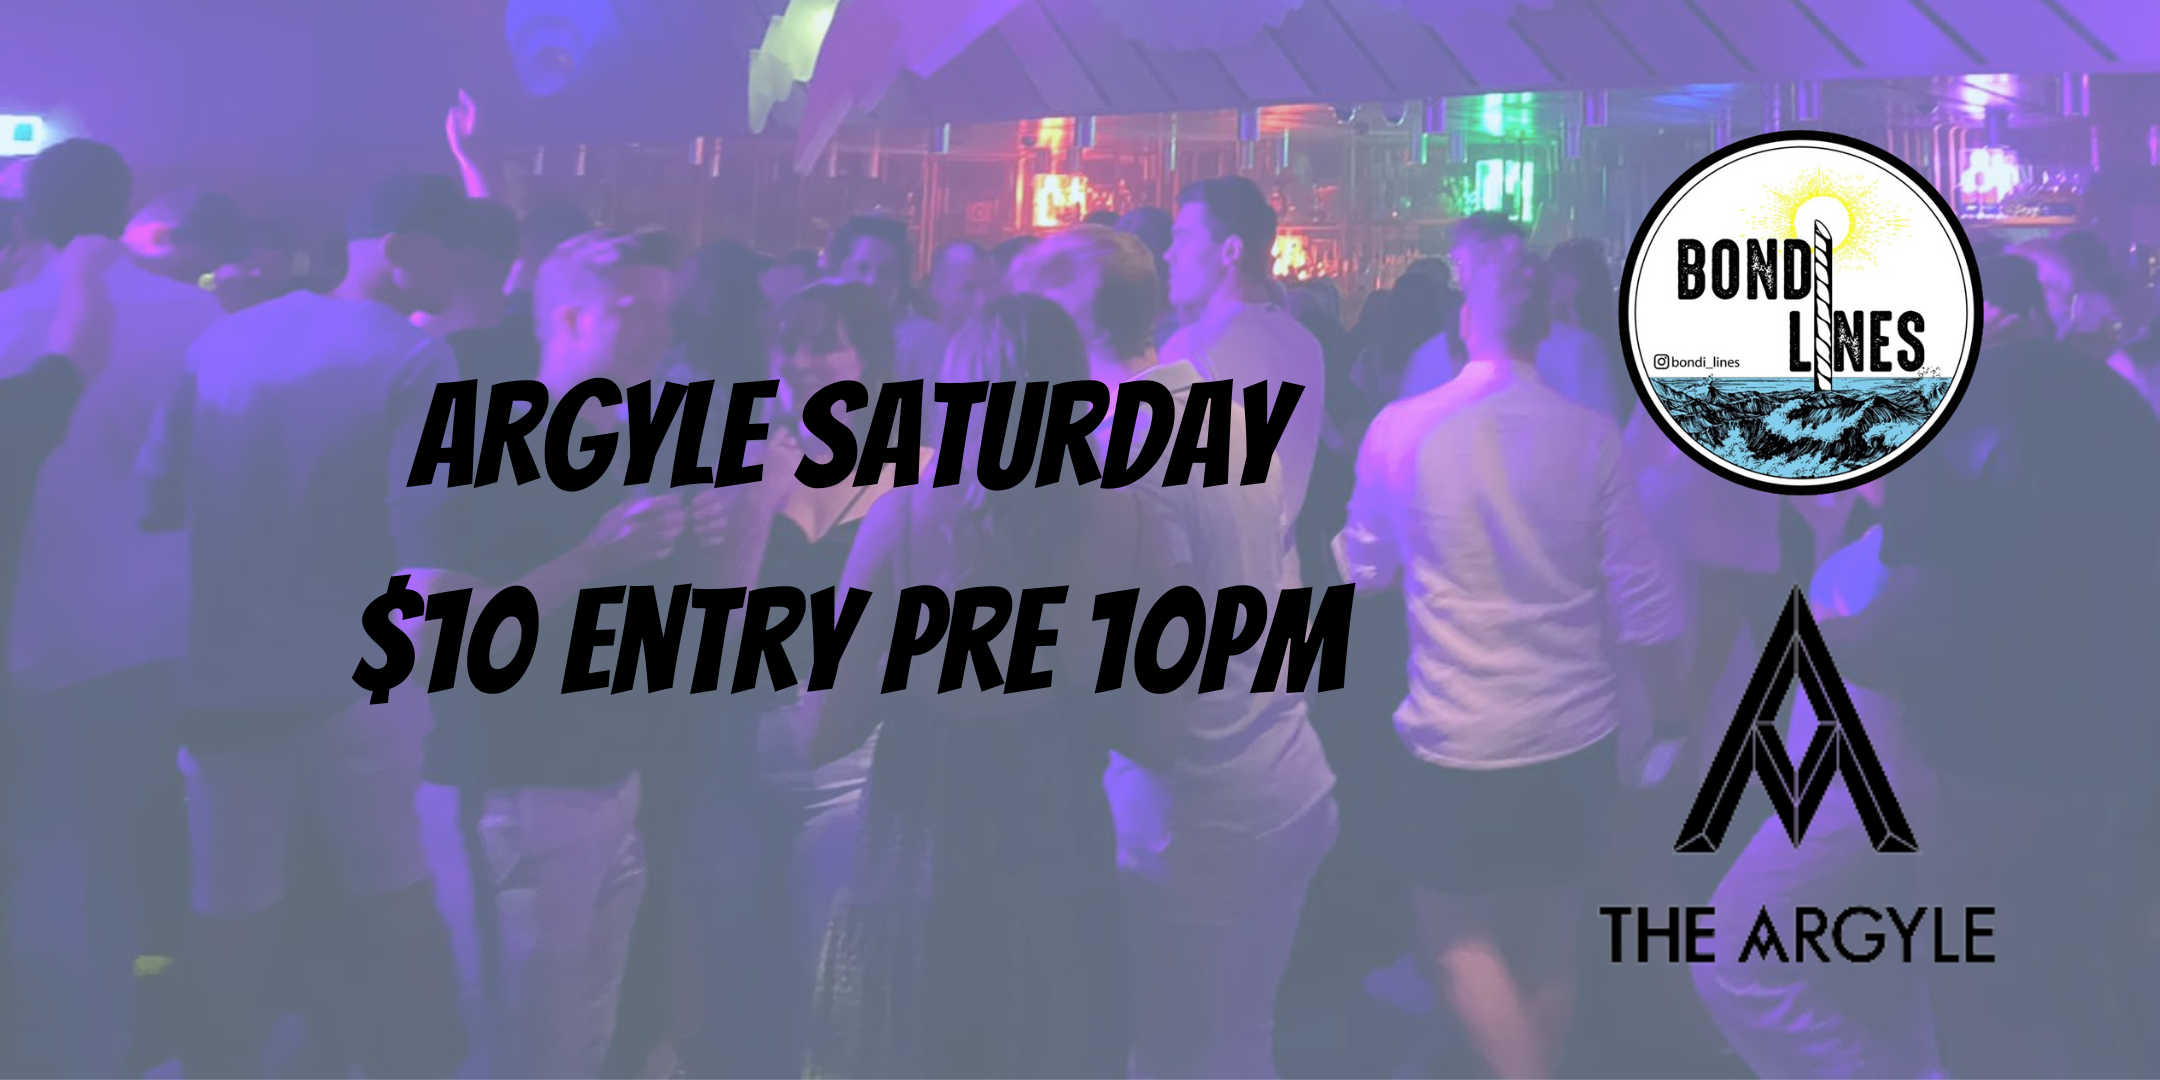 Argyle Saturday Discounted Entry Pre 10pm